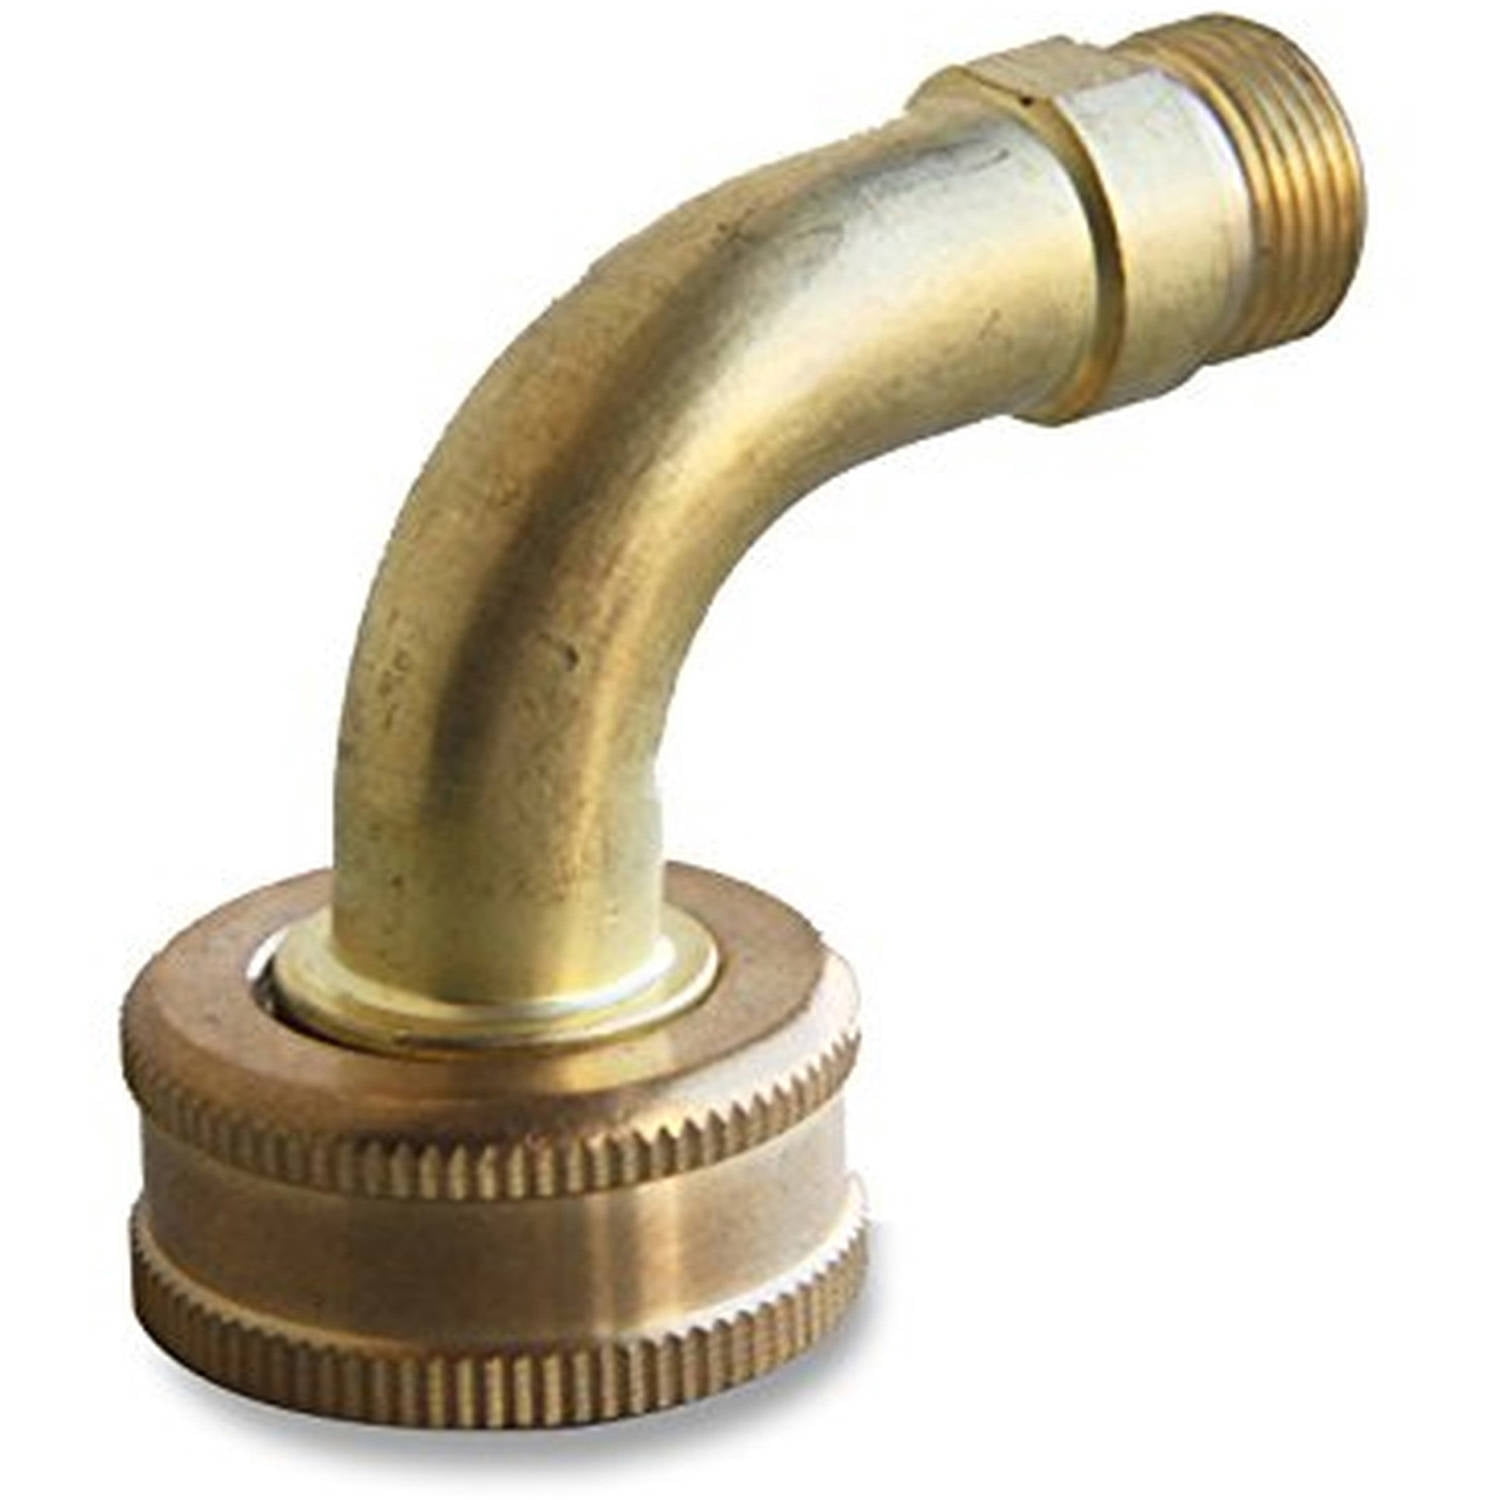 Highcraft Compression x Female Reducing Adapter Pipe Fitting; Lead Free Brass 